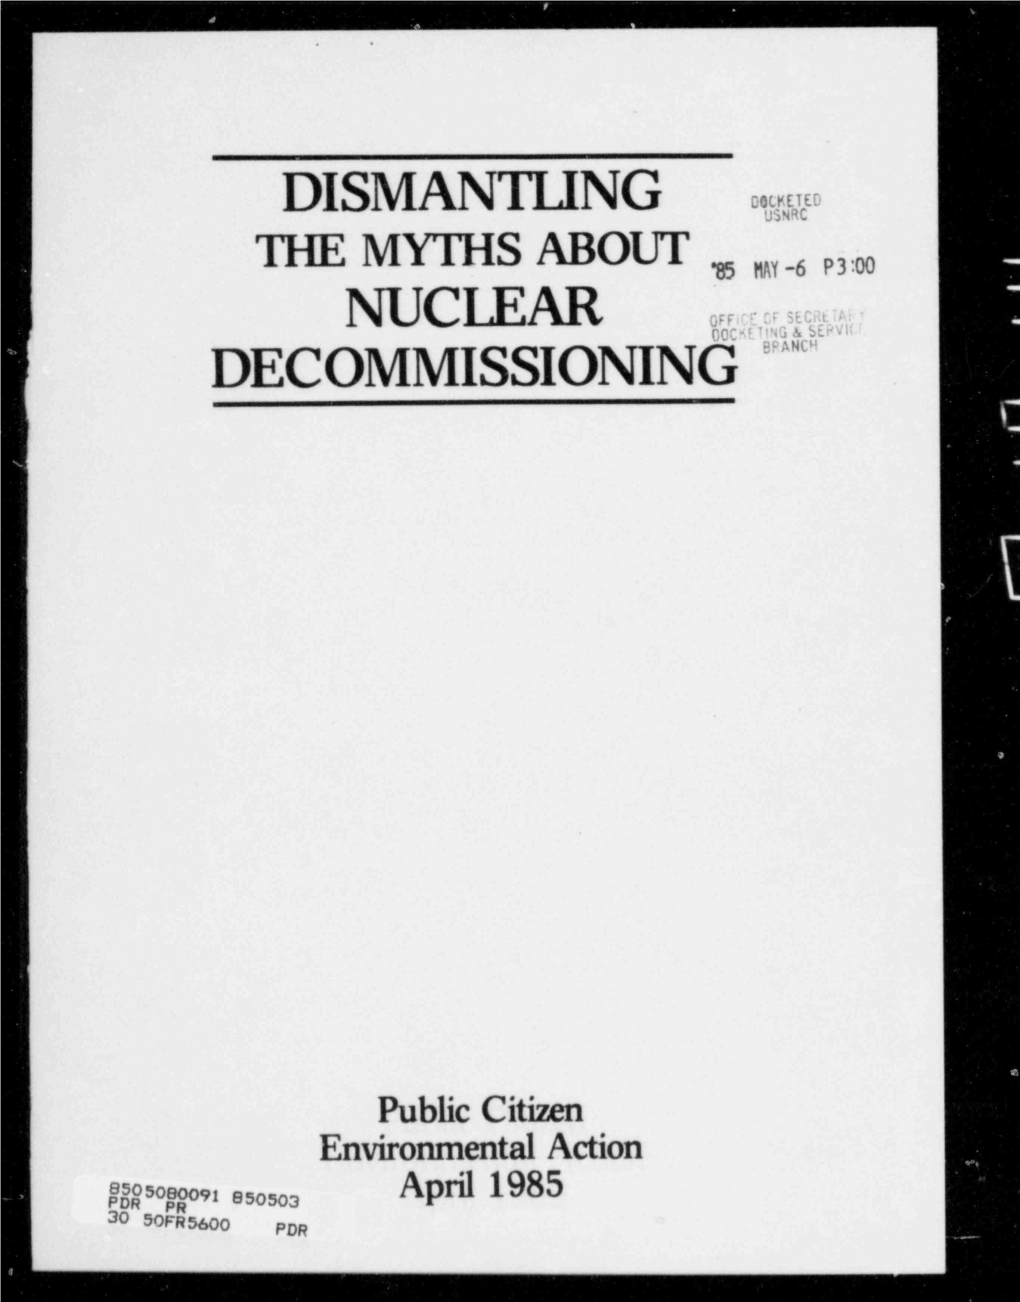 "Dismantling Myths About Nuclear Decommissioning."